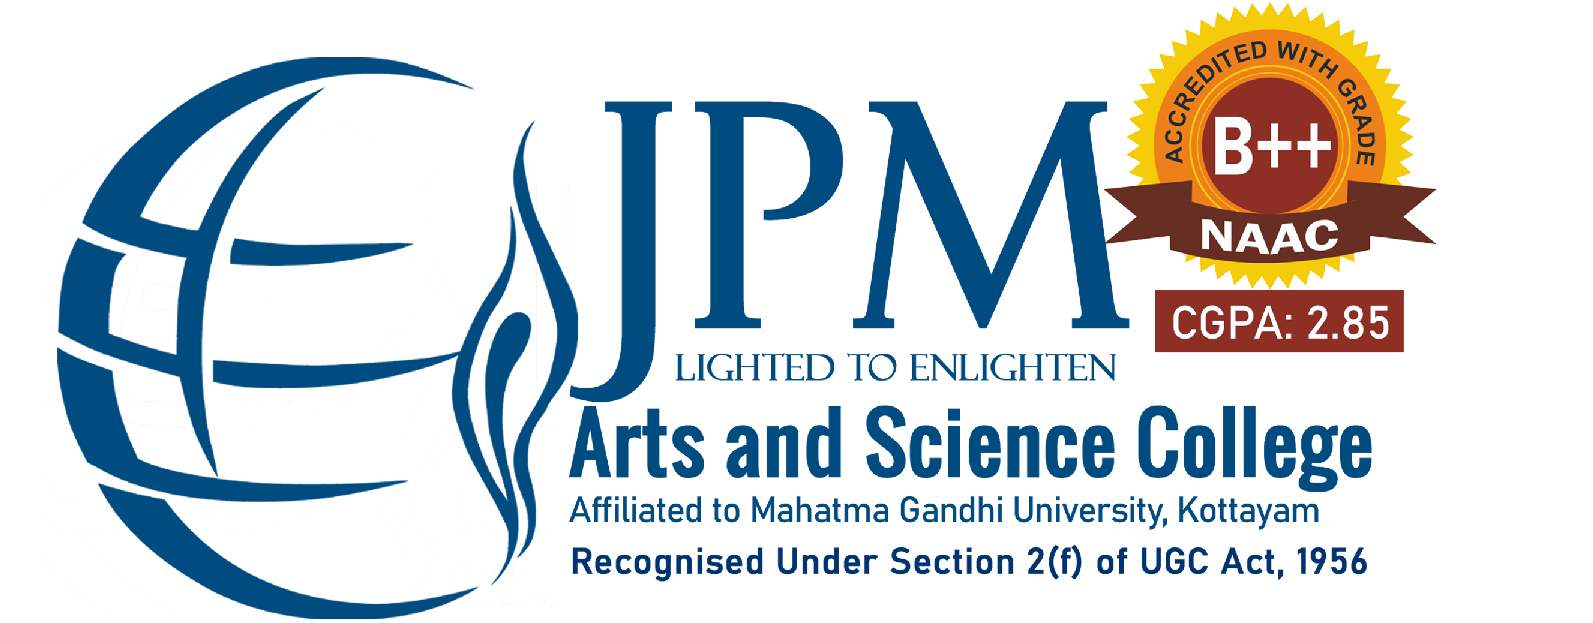 JPM-arts-and-science-college-logo